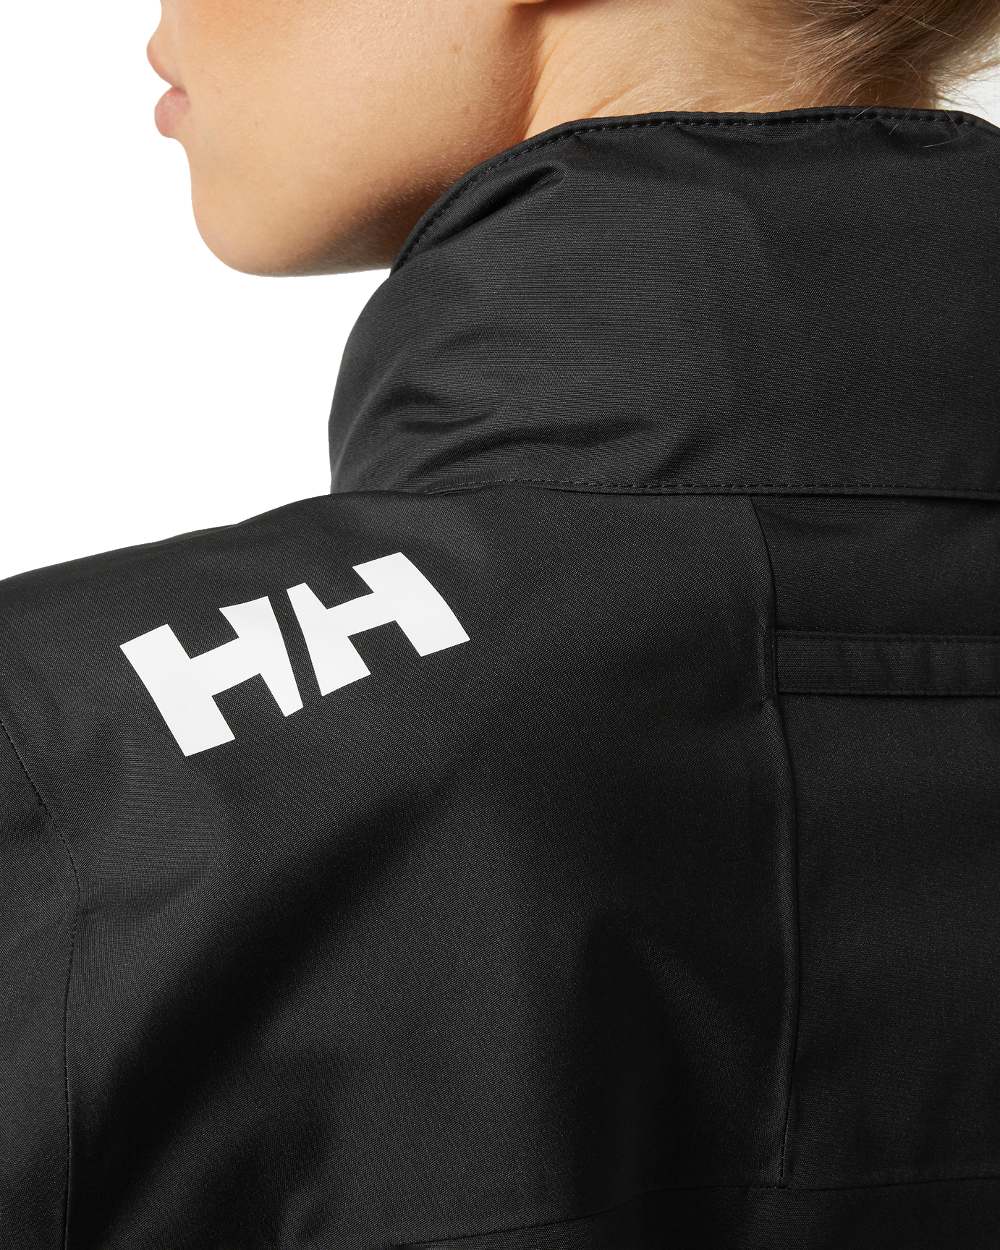 Black coloured Helly Hansen womens crew hooded sailing jacket 2.0 on white background 